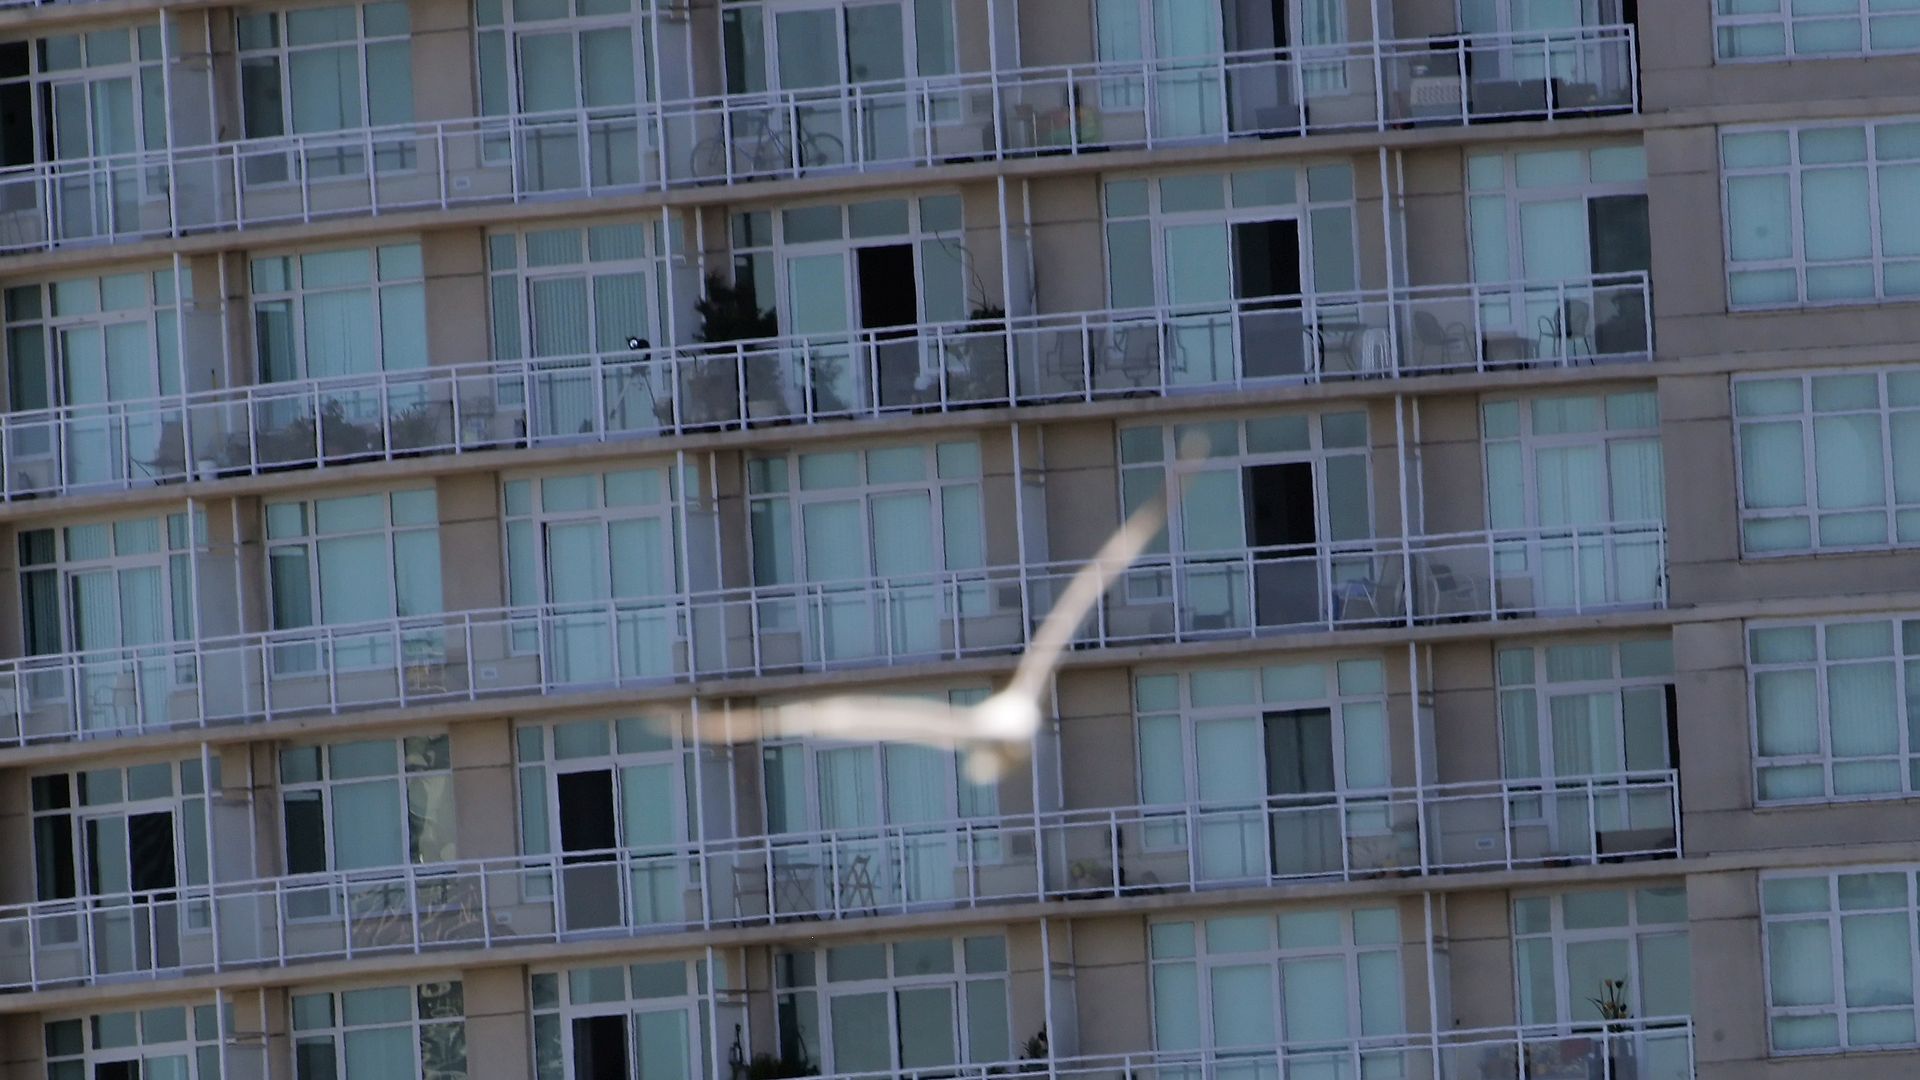 A gull is blurry in the foreground as it flies near an apartment building with extensive glass.